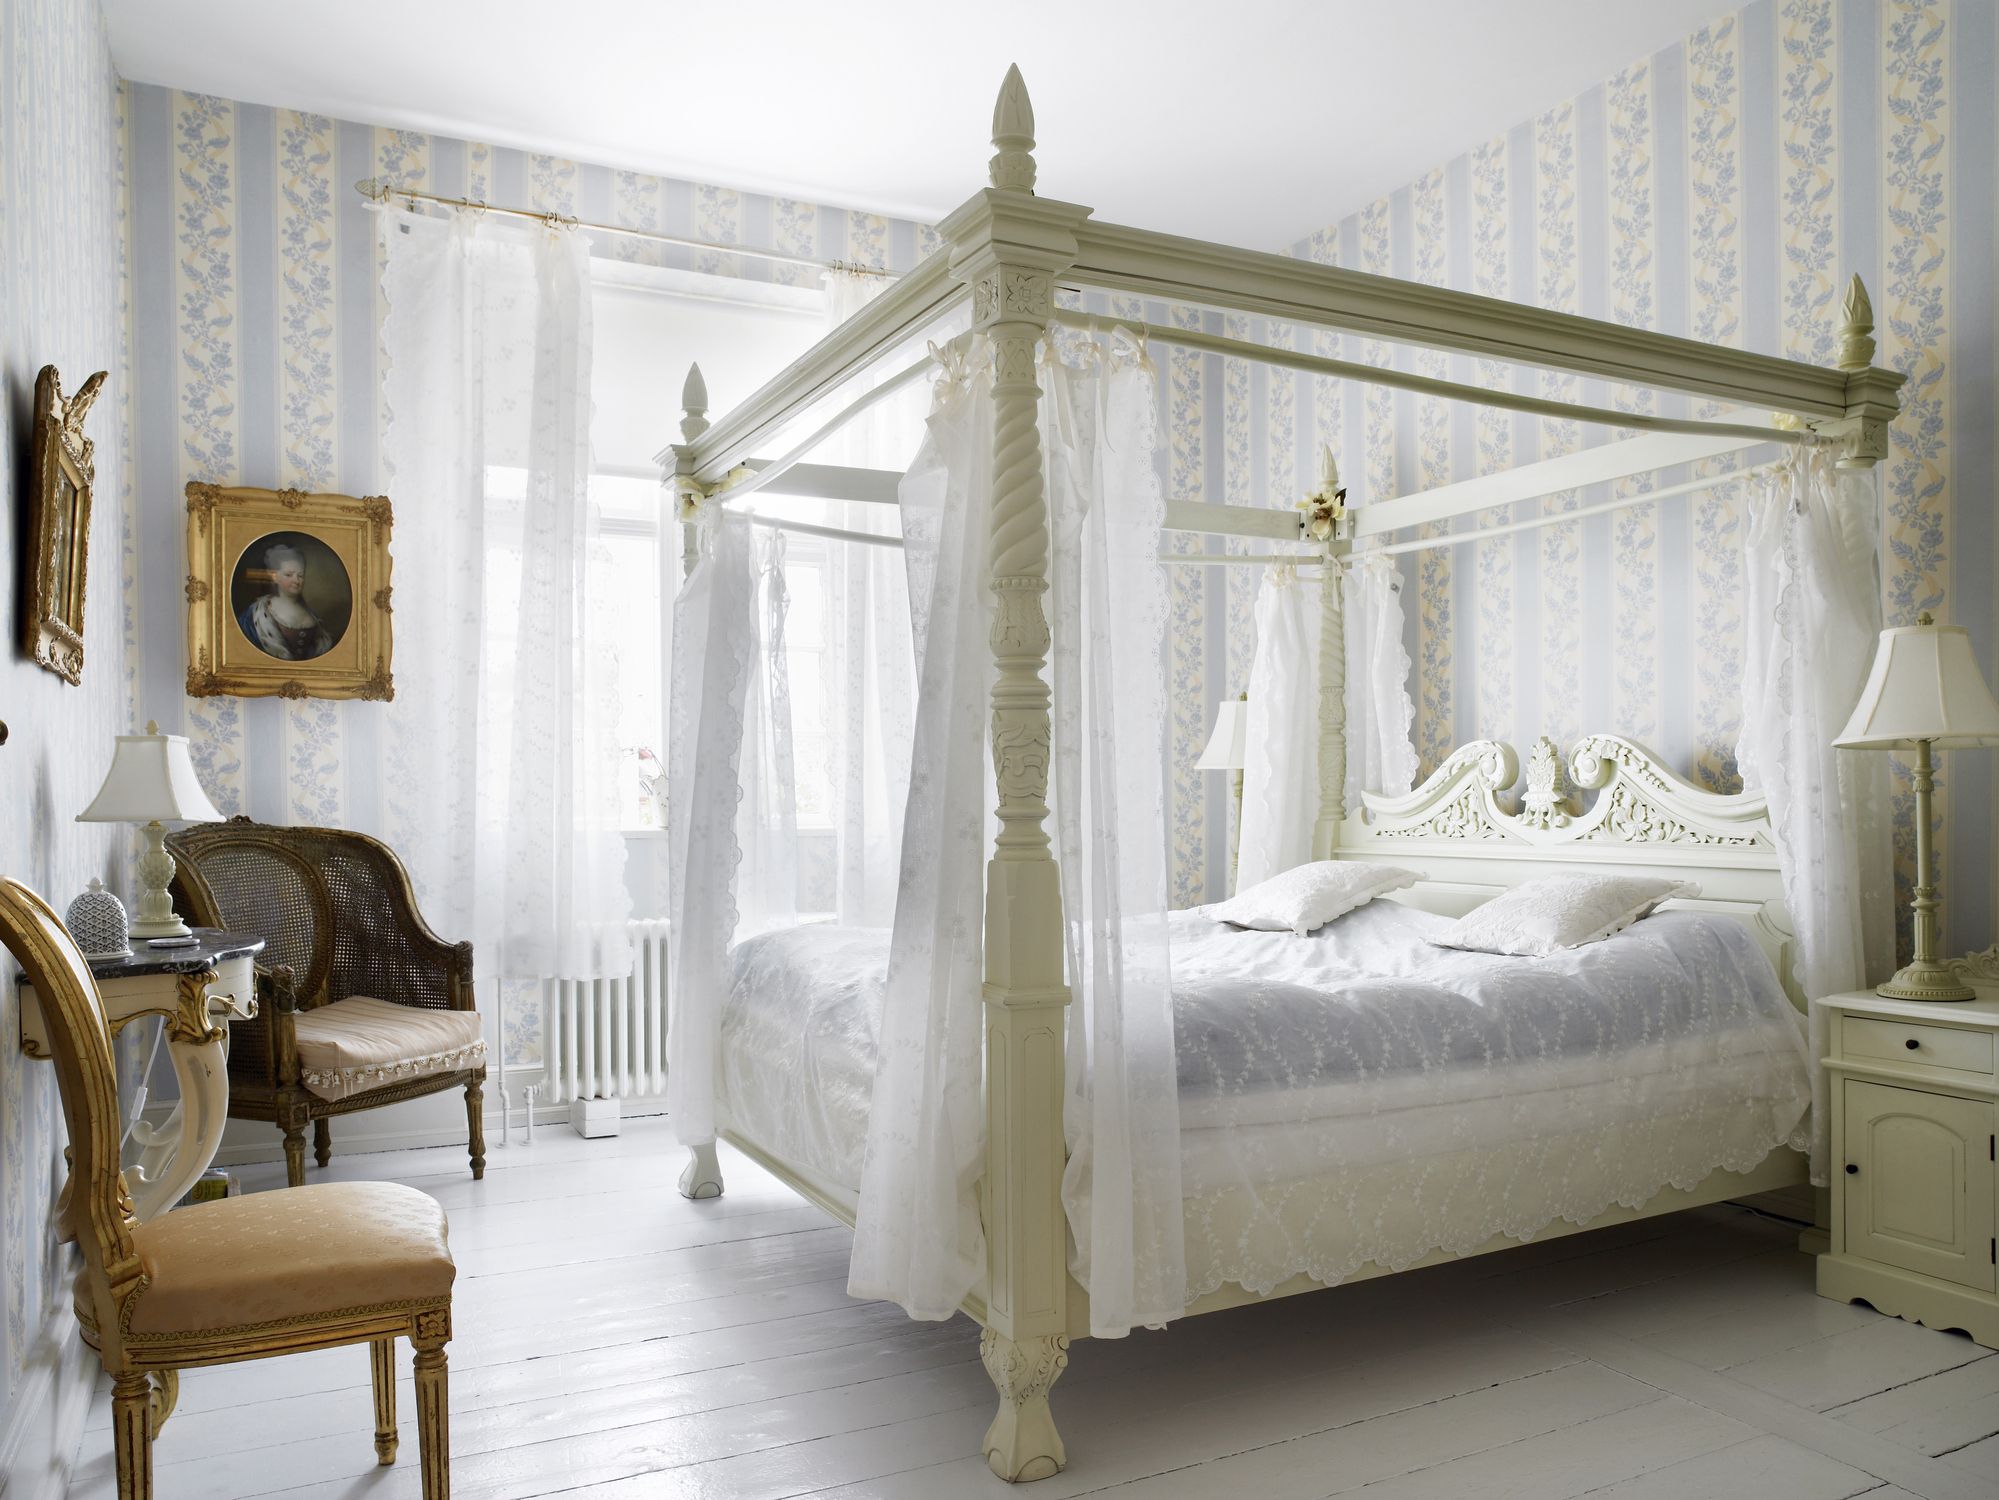 French Country Bedroom Sets and Headboards